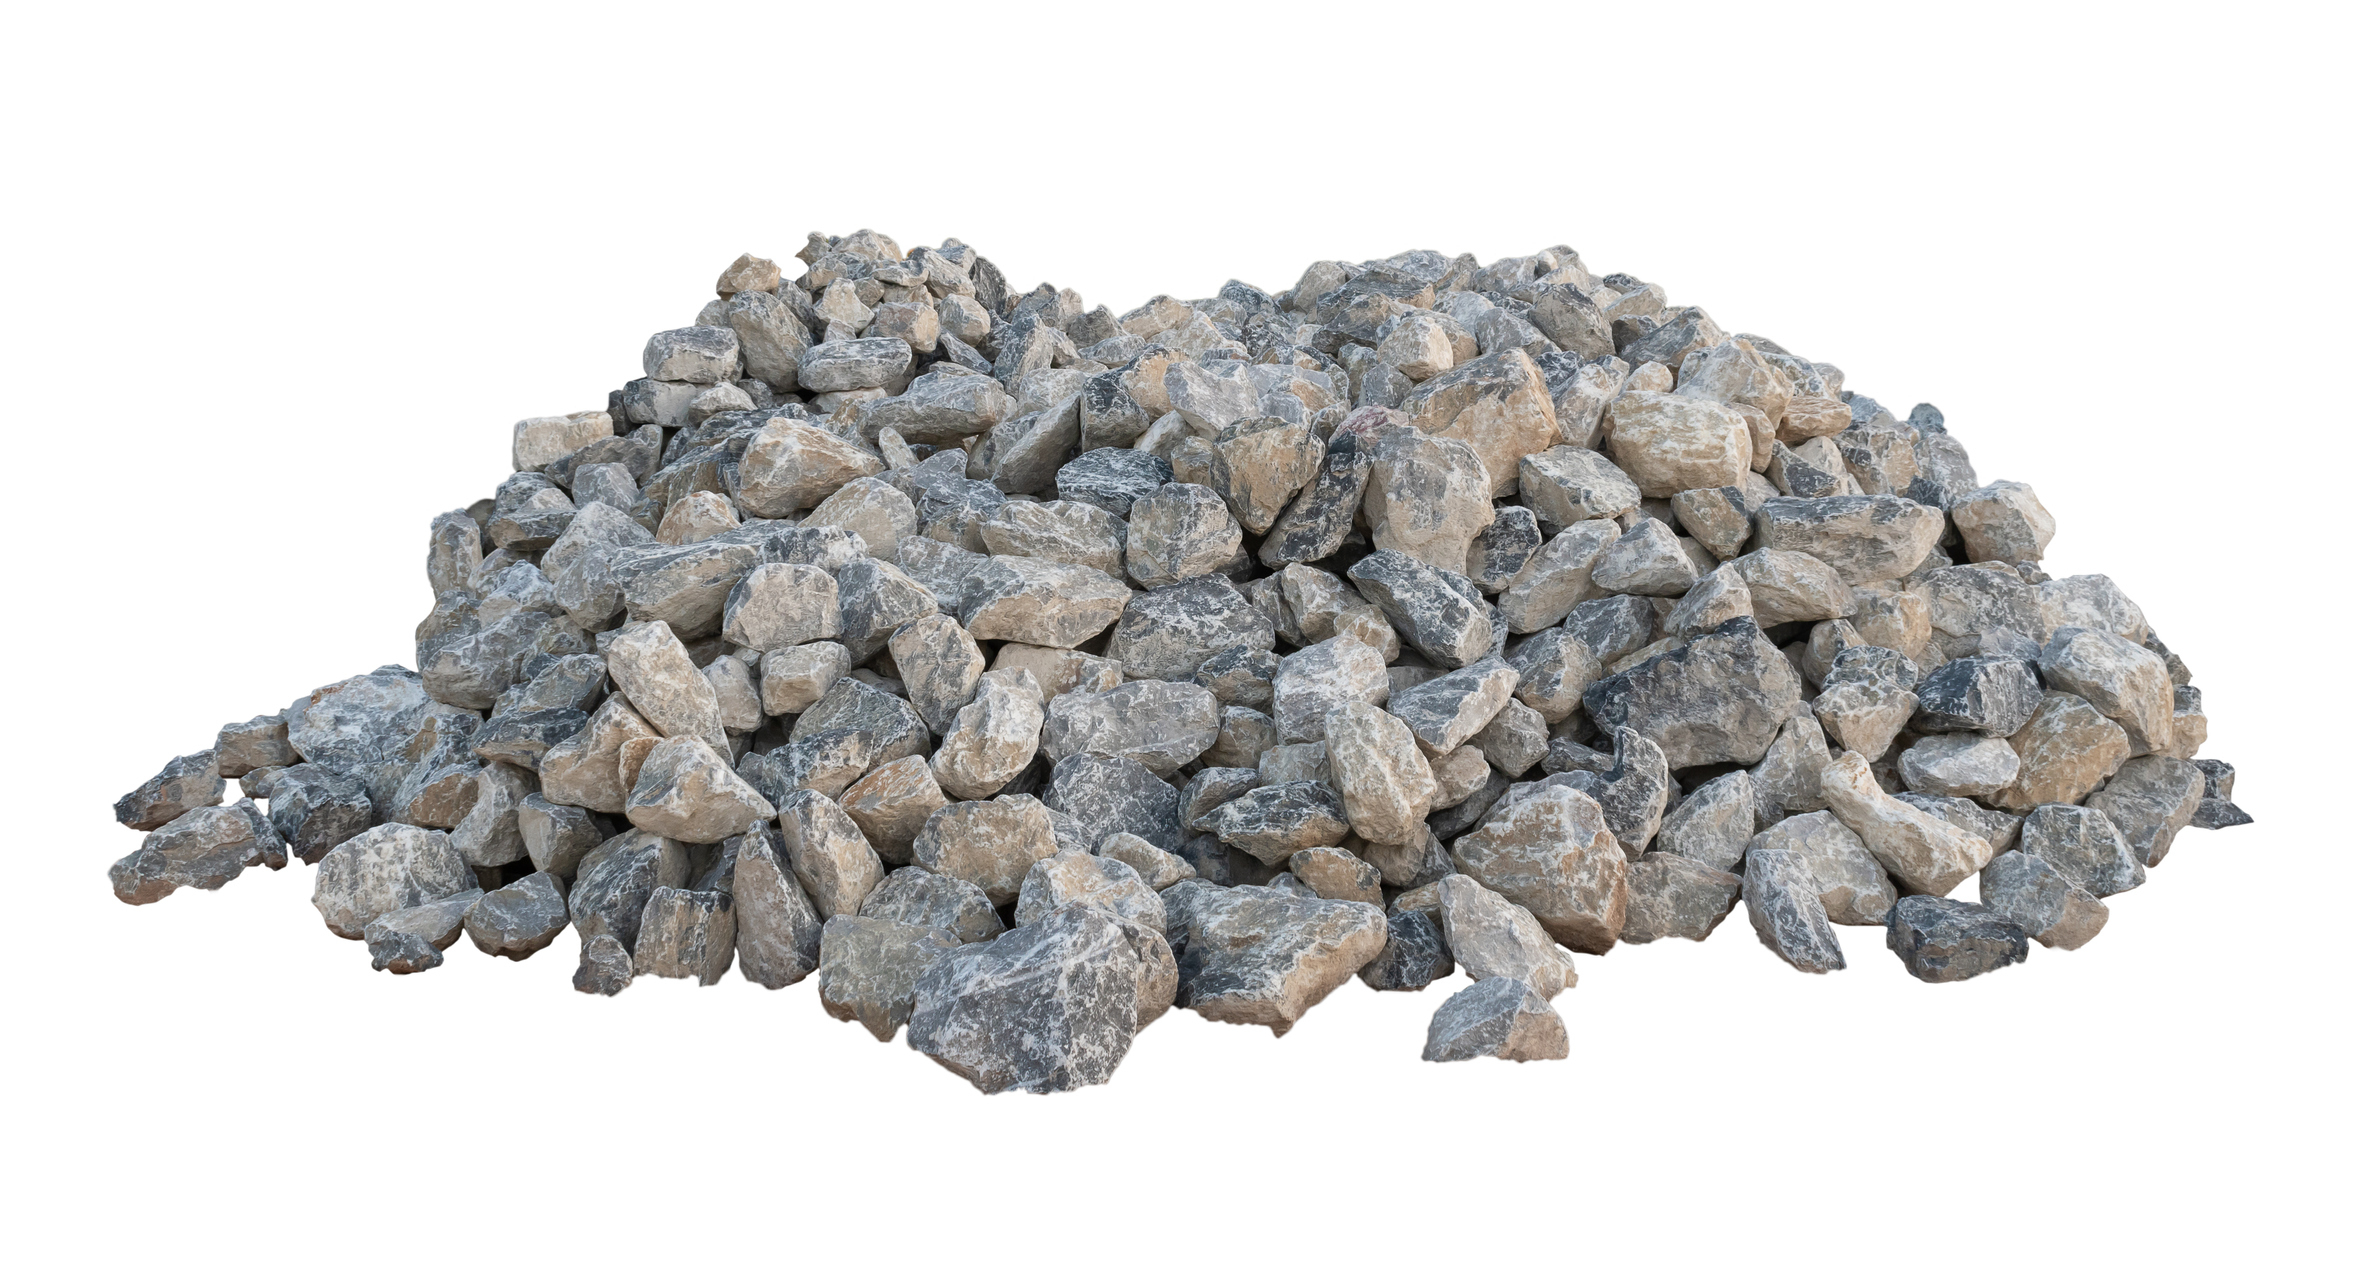 A pile of rocks